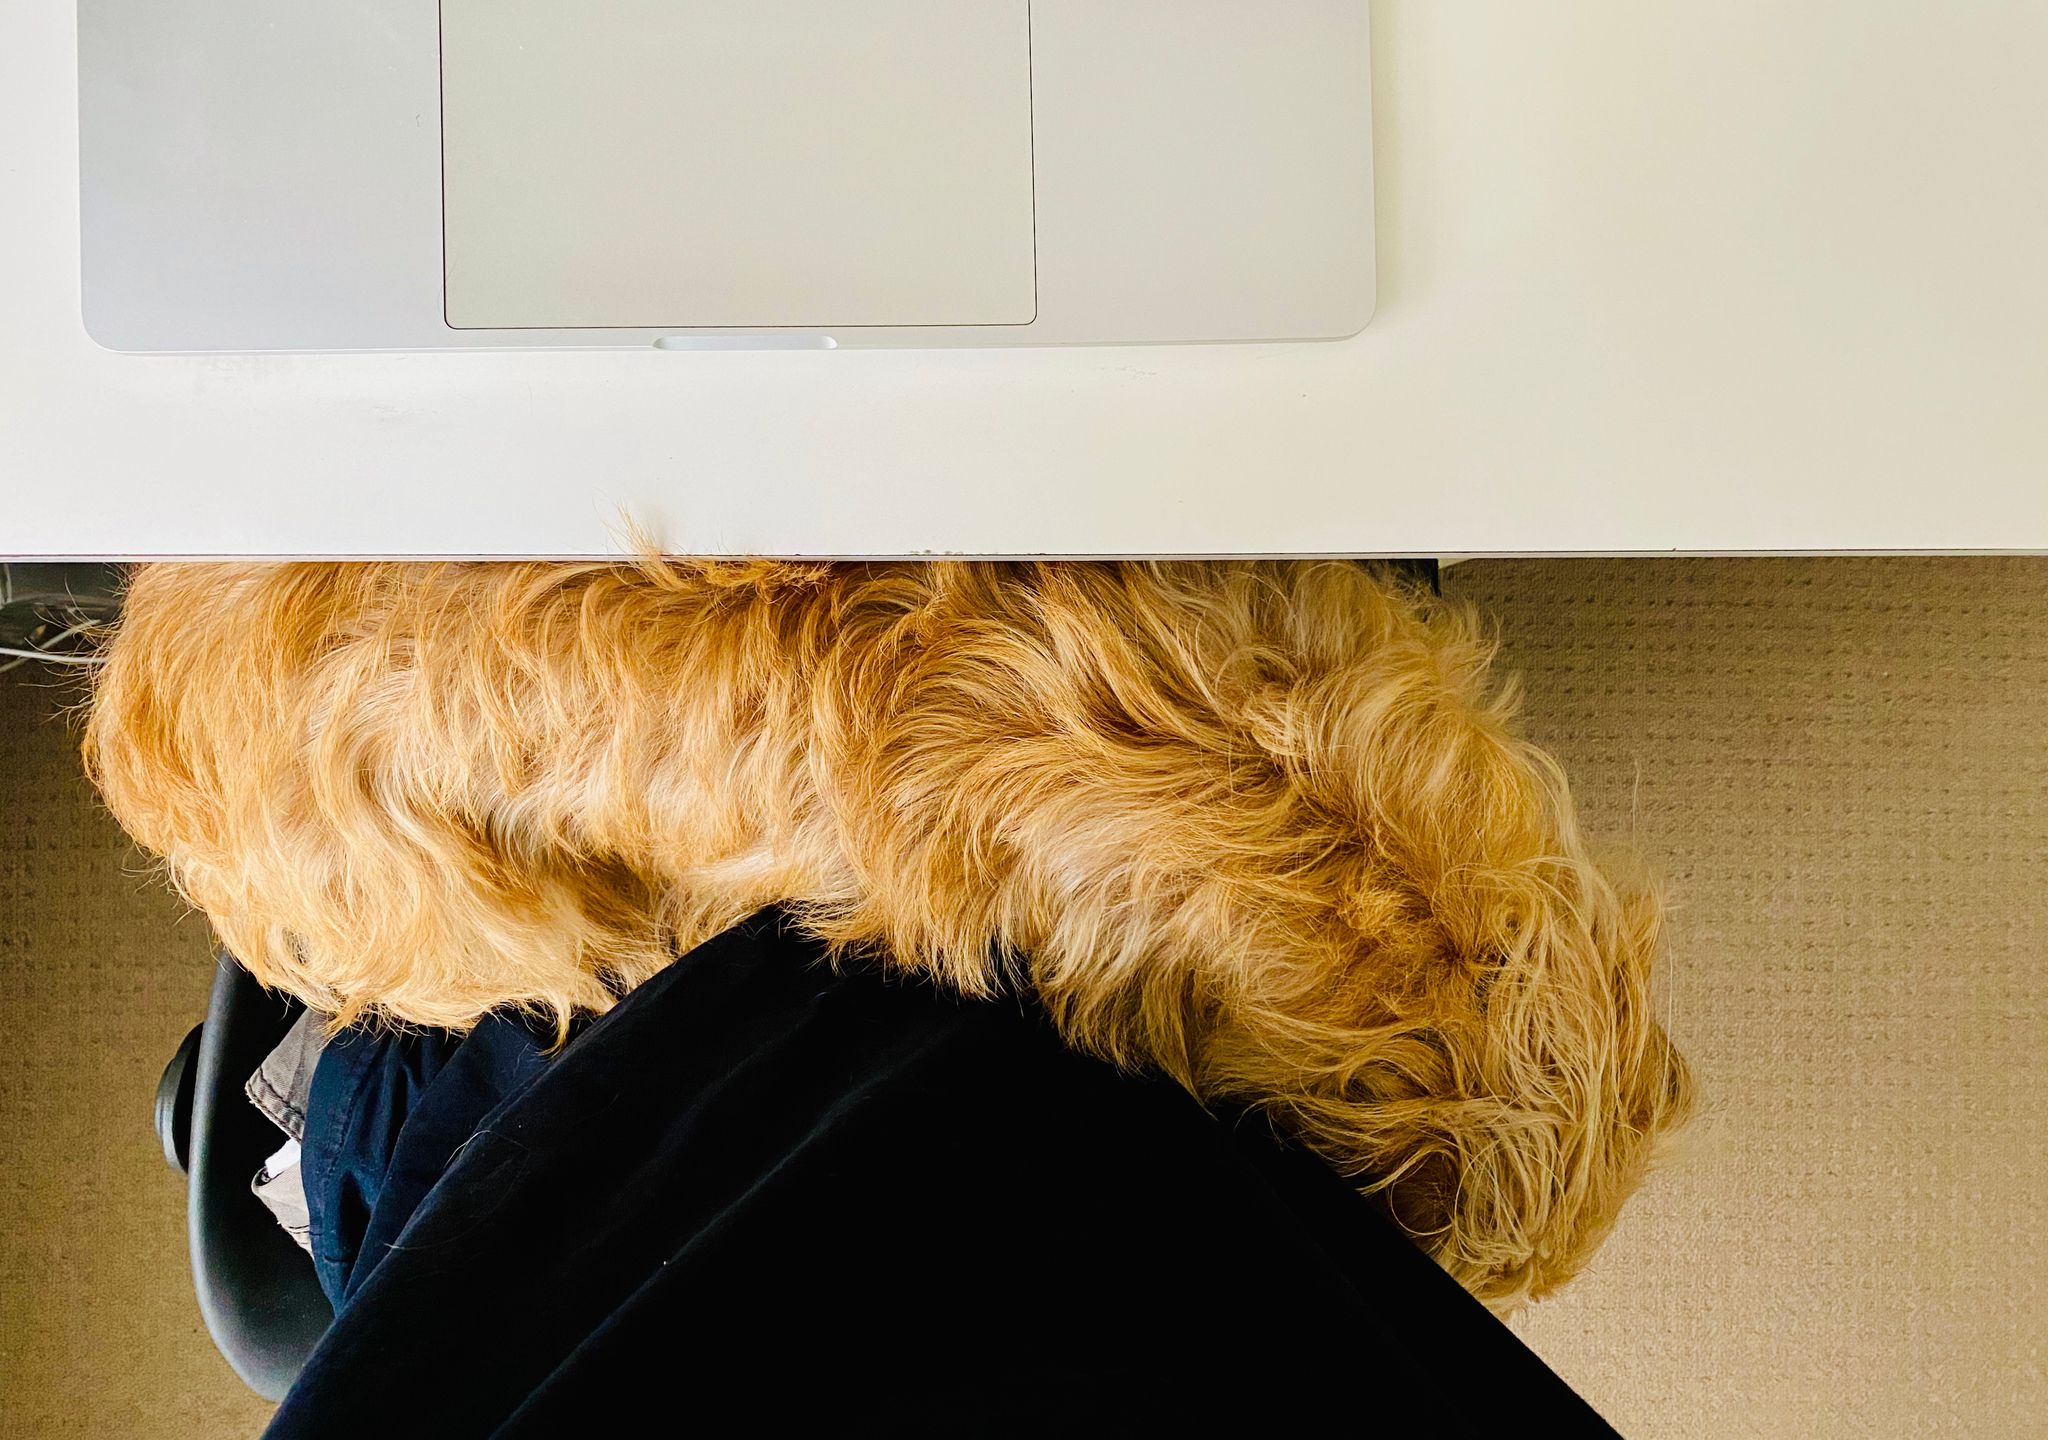 A photo taken from above my lap as I'm sitting at my computer desk showing a small scruffy blonde dog draped across my lap.